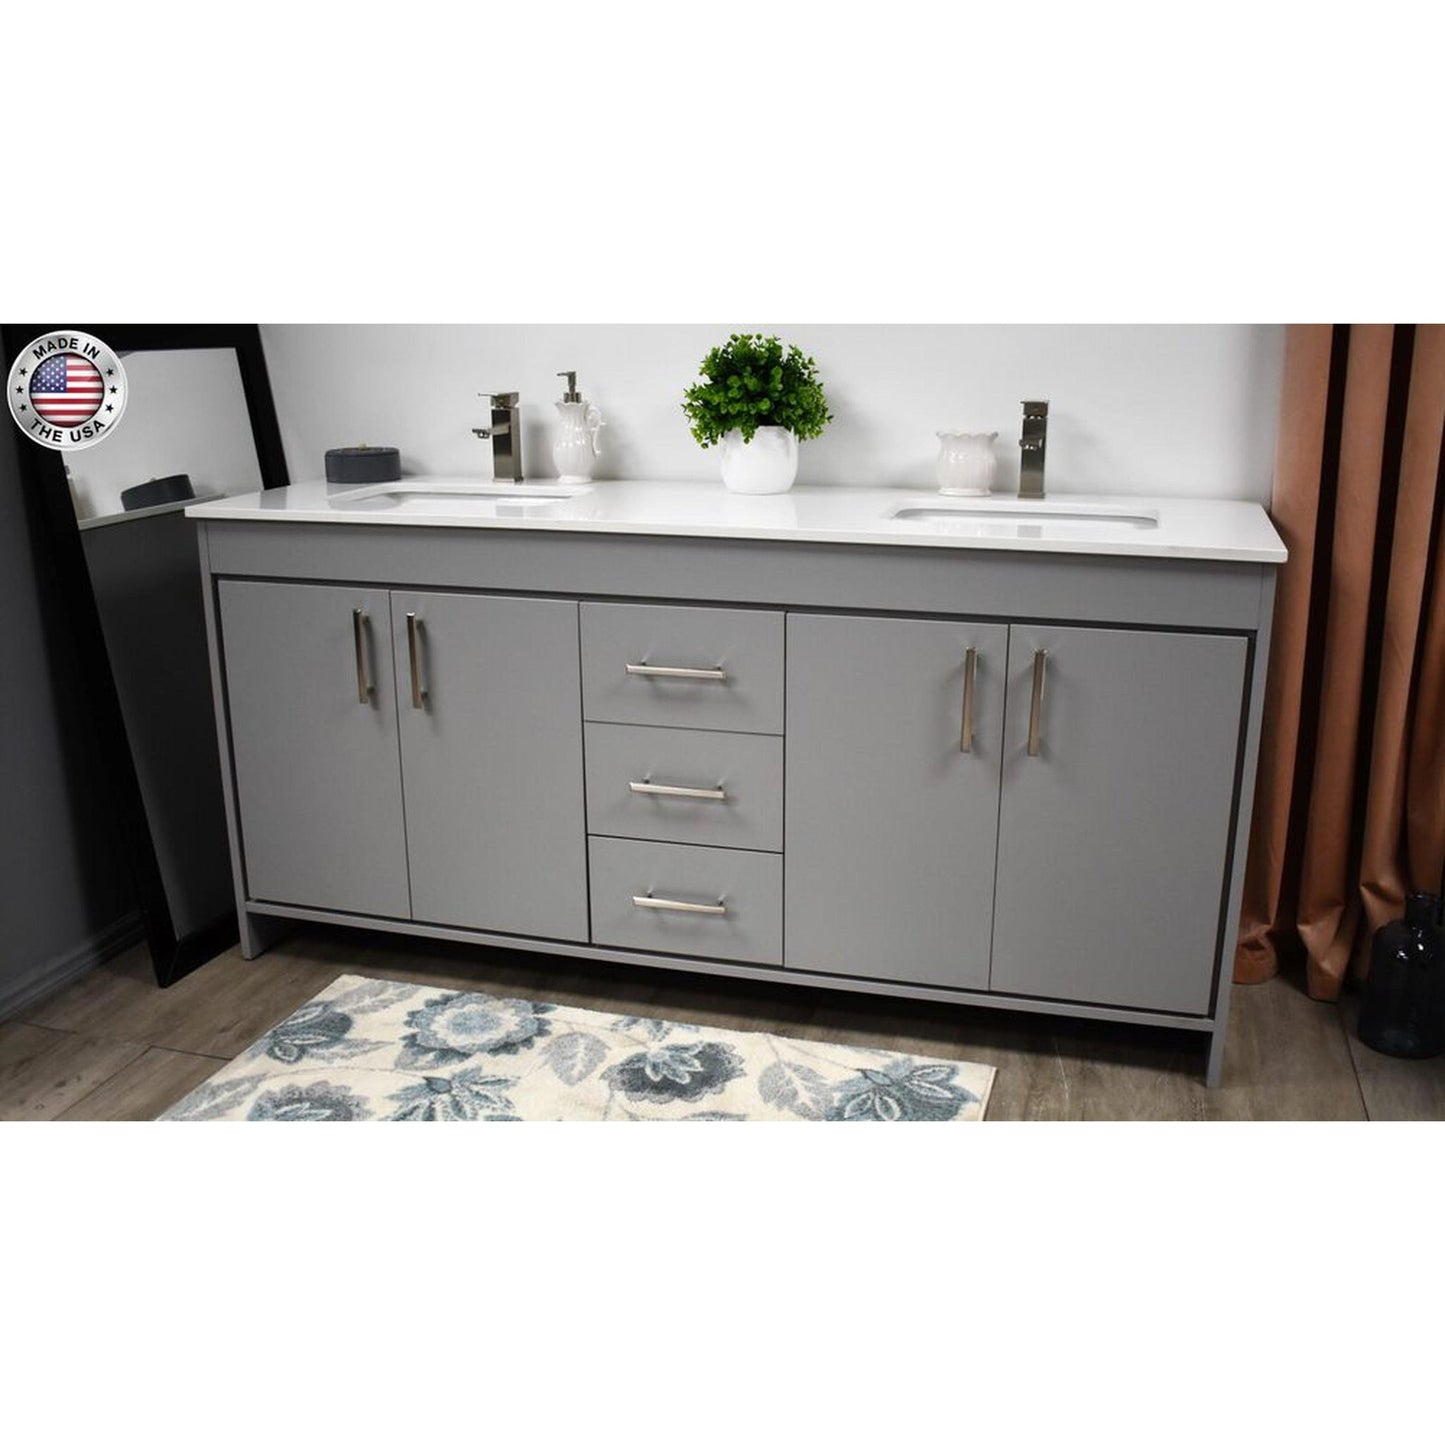 Volpa USA Capri 72" x 22" Gray Freestanding Modern Bathroom Vanity With Undermount Double Sink And White Microstone Top With Brushed Nickel Edge Handles